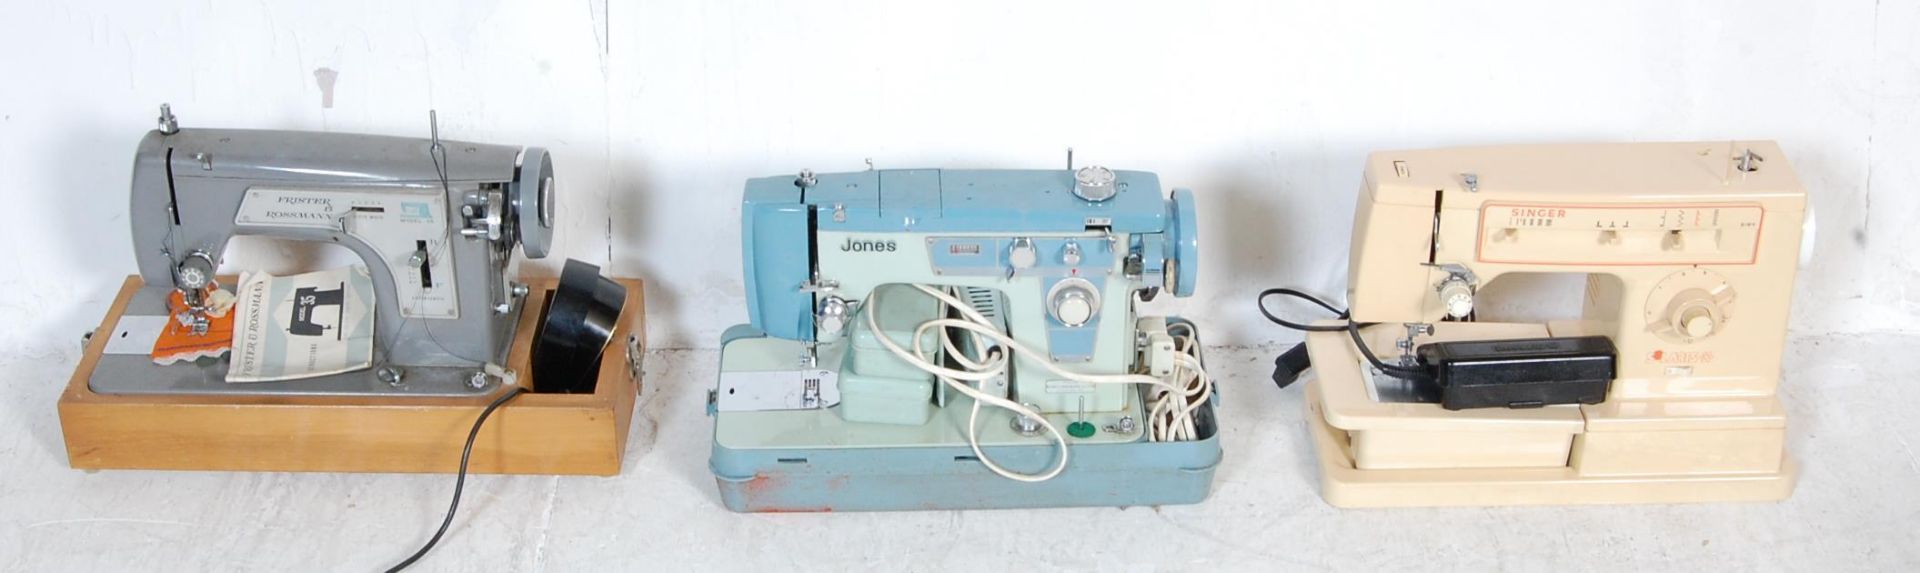 THREE VINTAGE ELECTRONIC SEWING MACHINES